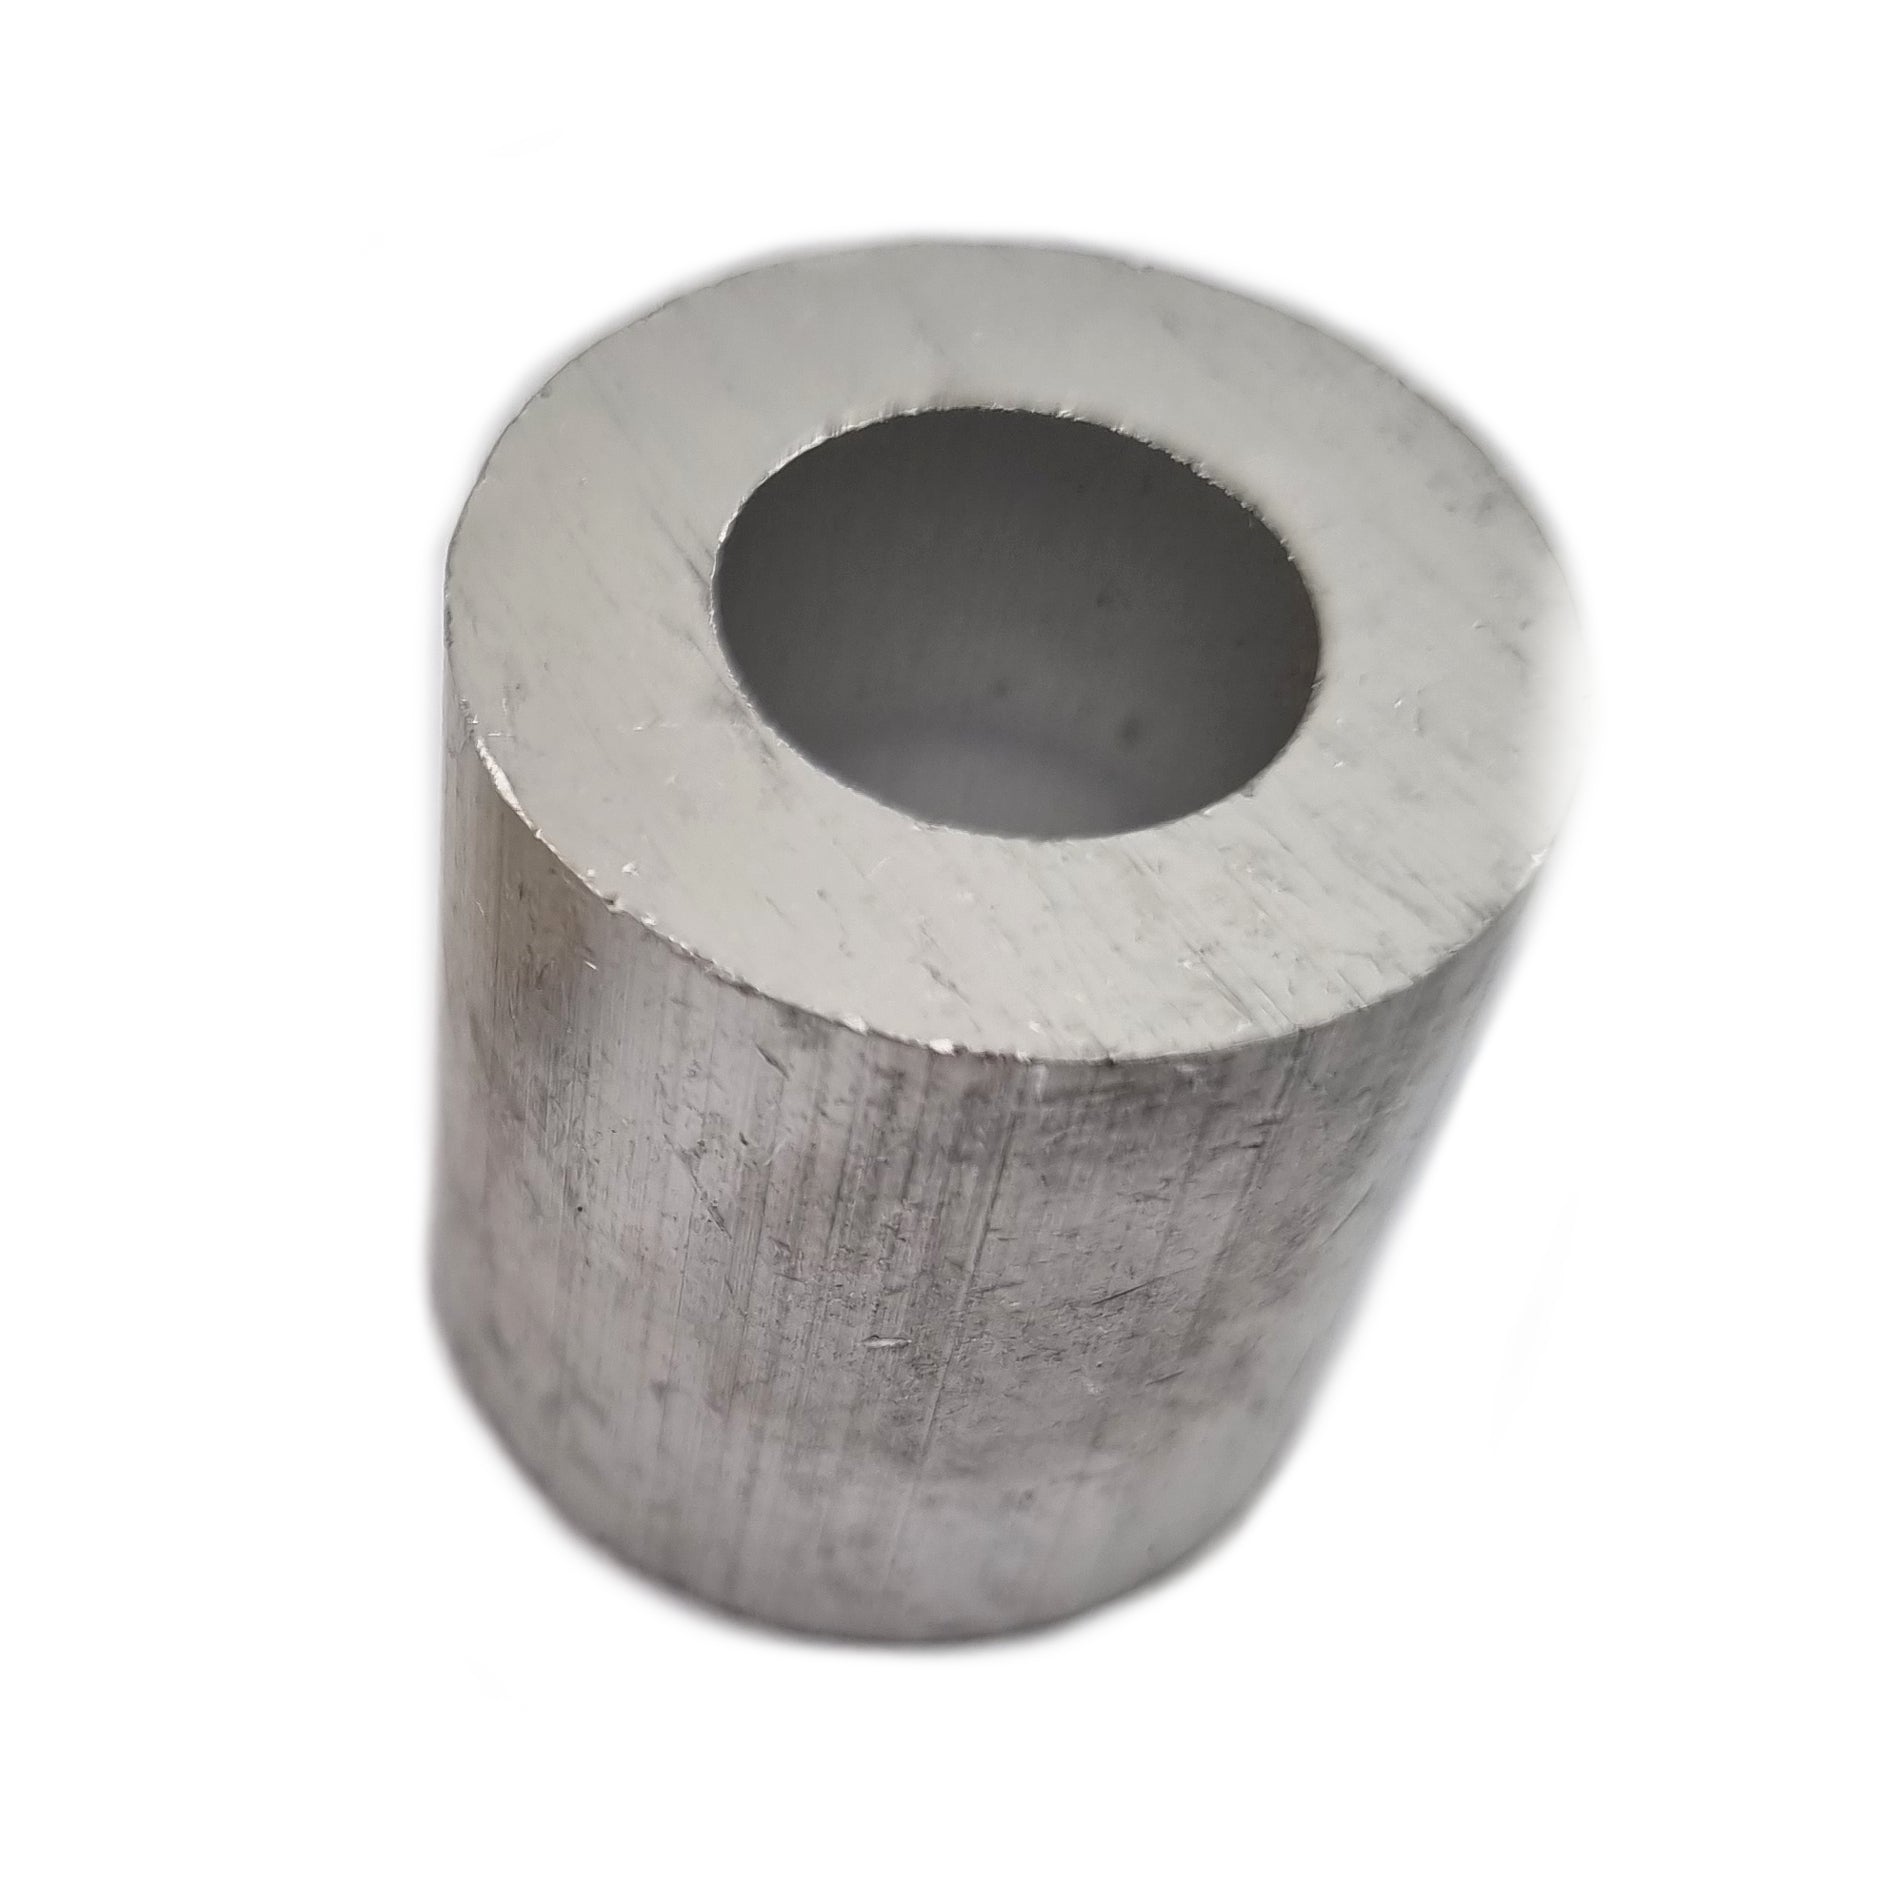 12mm aluminium end stop. Also known as swage stop or ferrule stop. Shop balustrade chain.com.au